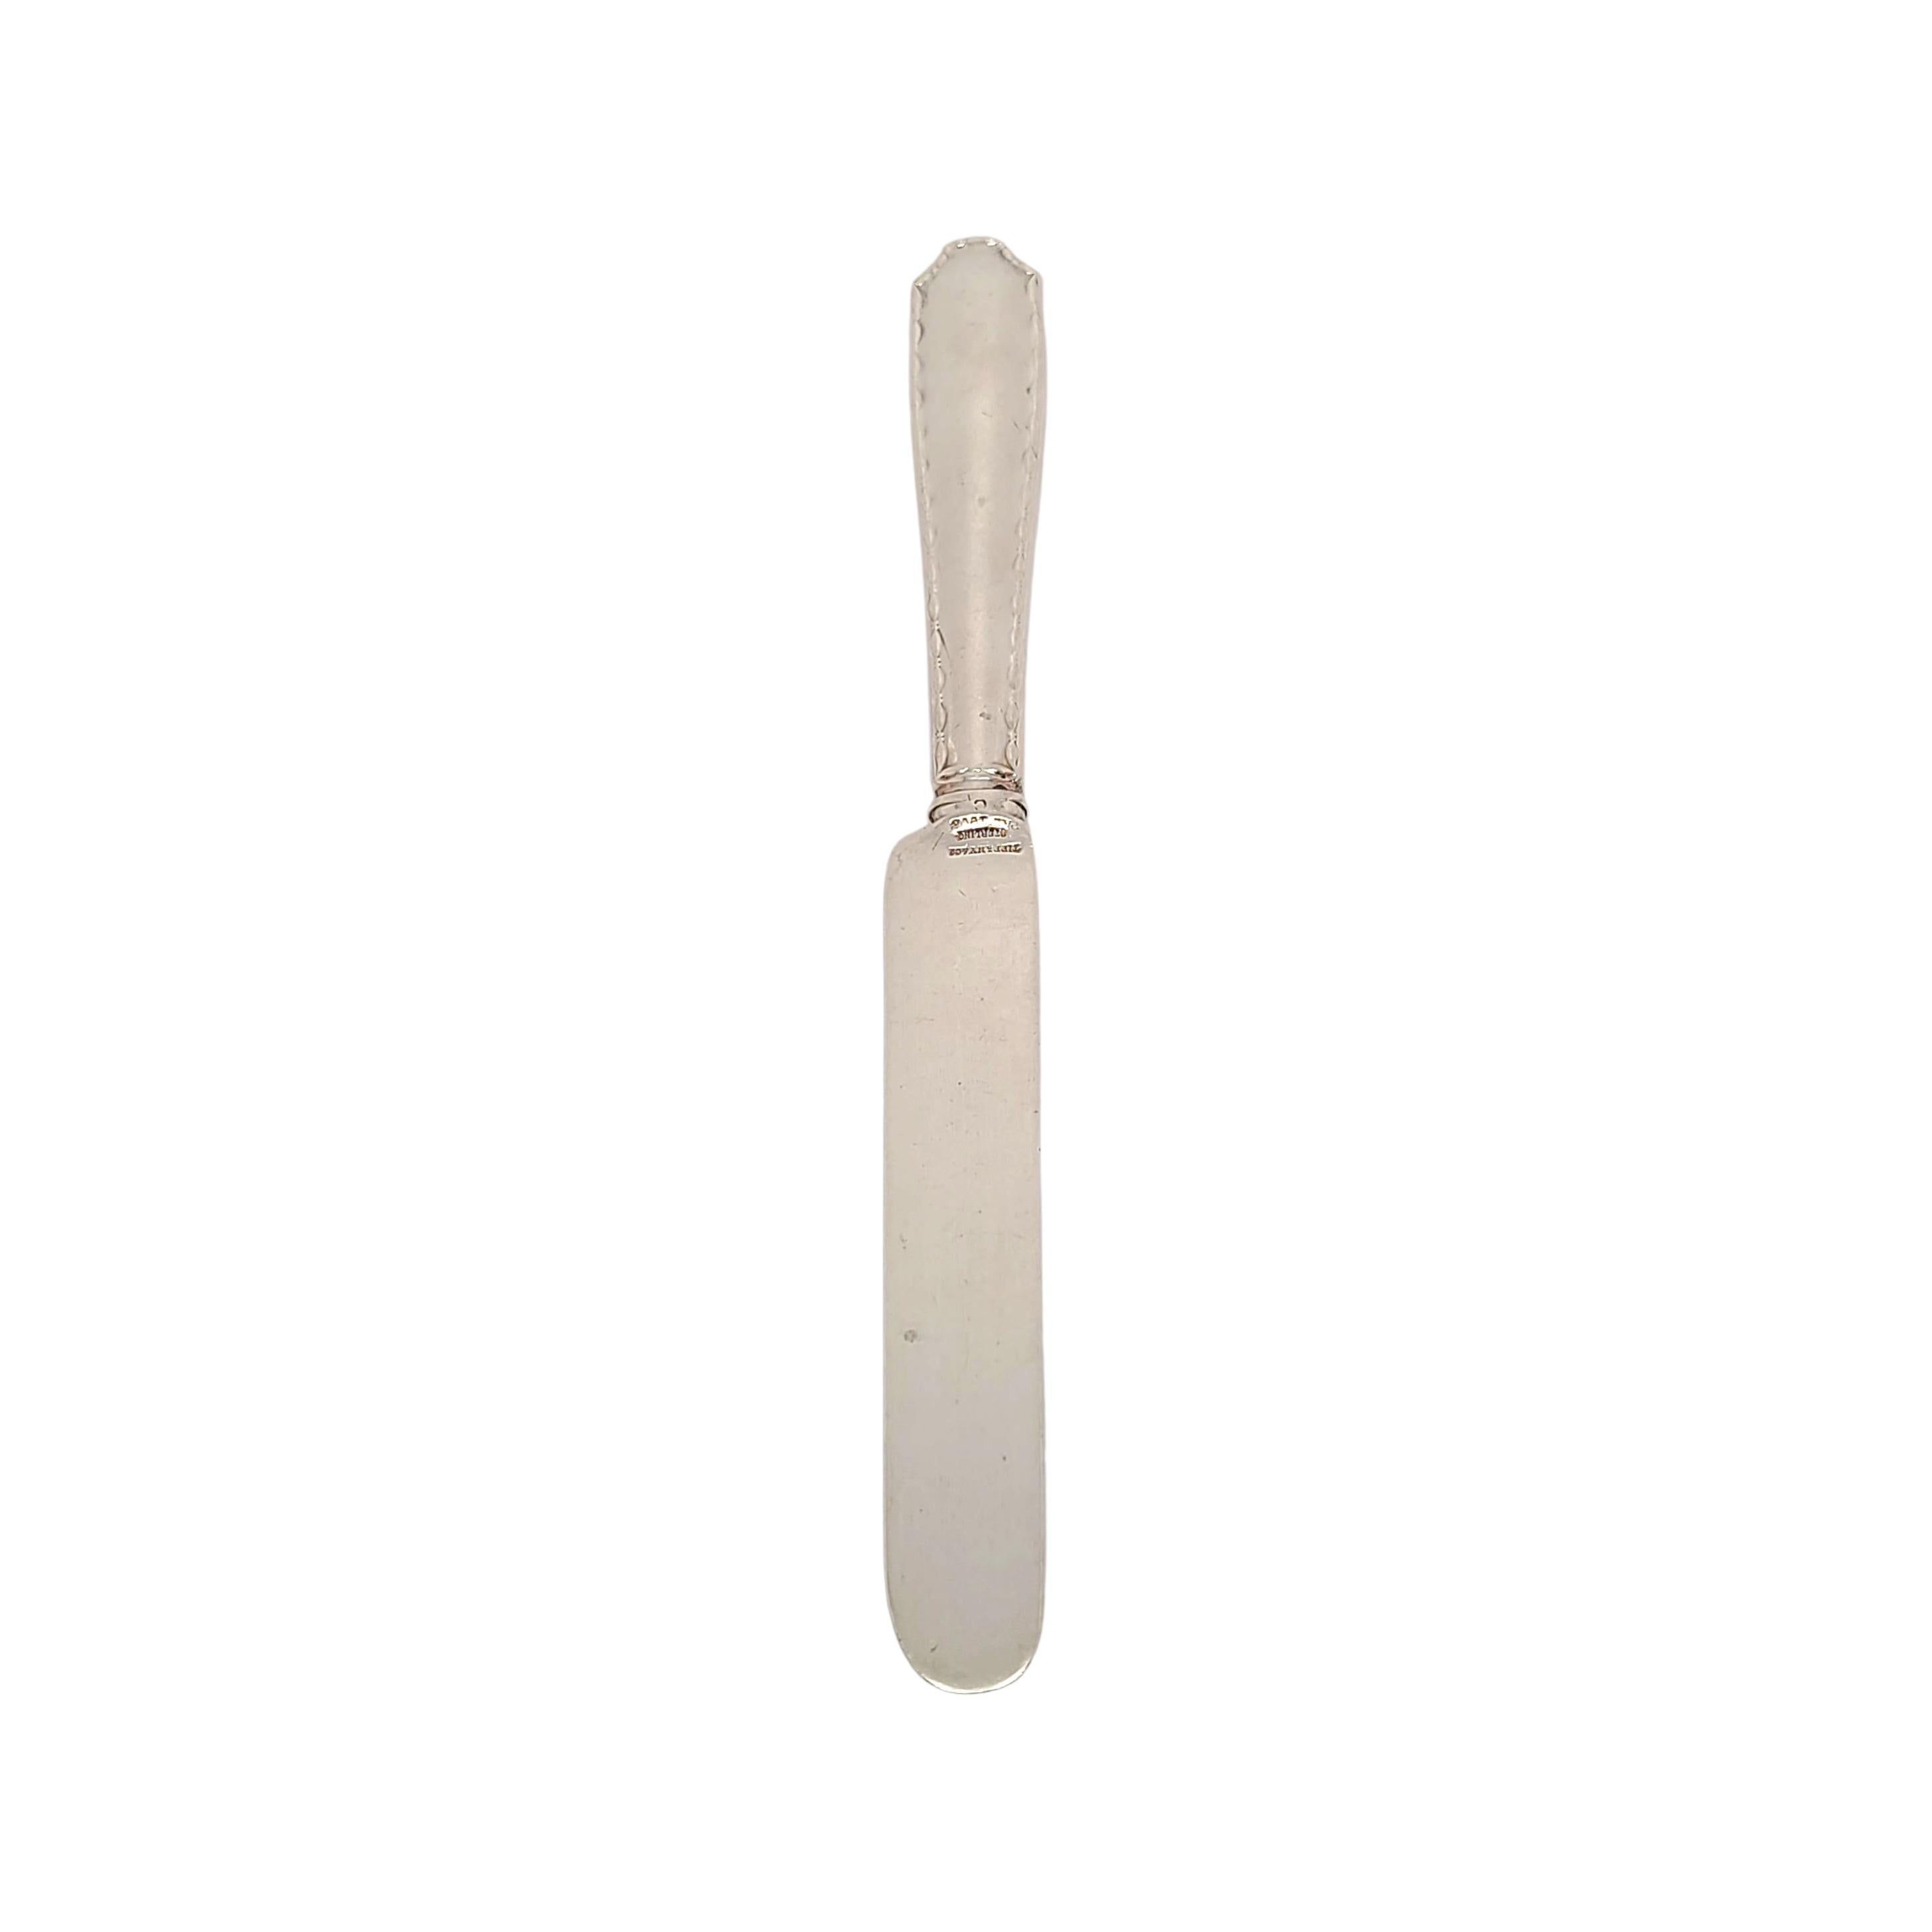 Tiffany & Co sterling silver dessert/tea knife in the Marquise pattern.

Marquise is simple and elegant pattern, designed by Paulding Farnham in 1902. Hallmarks date this piece to manufacture under the directorship of Charles T. Cook, 1902-07. Does